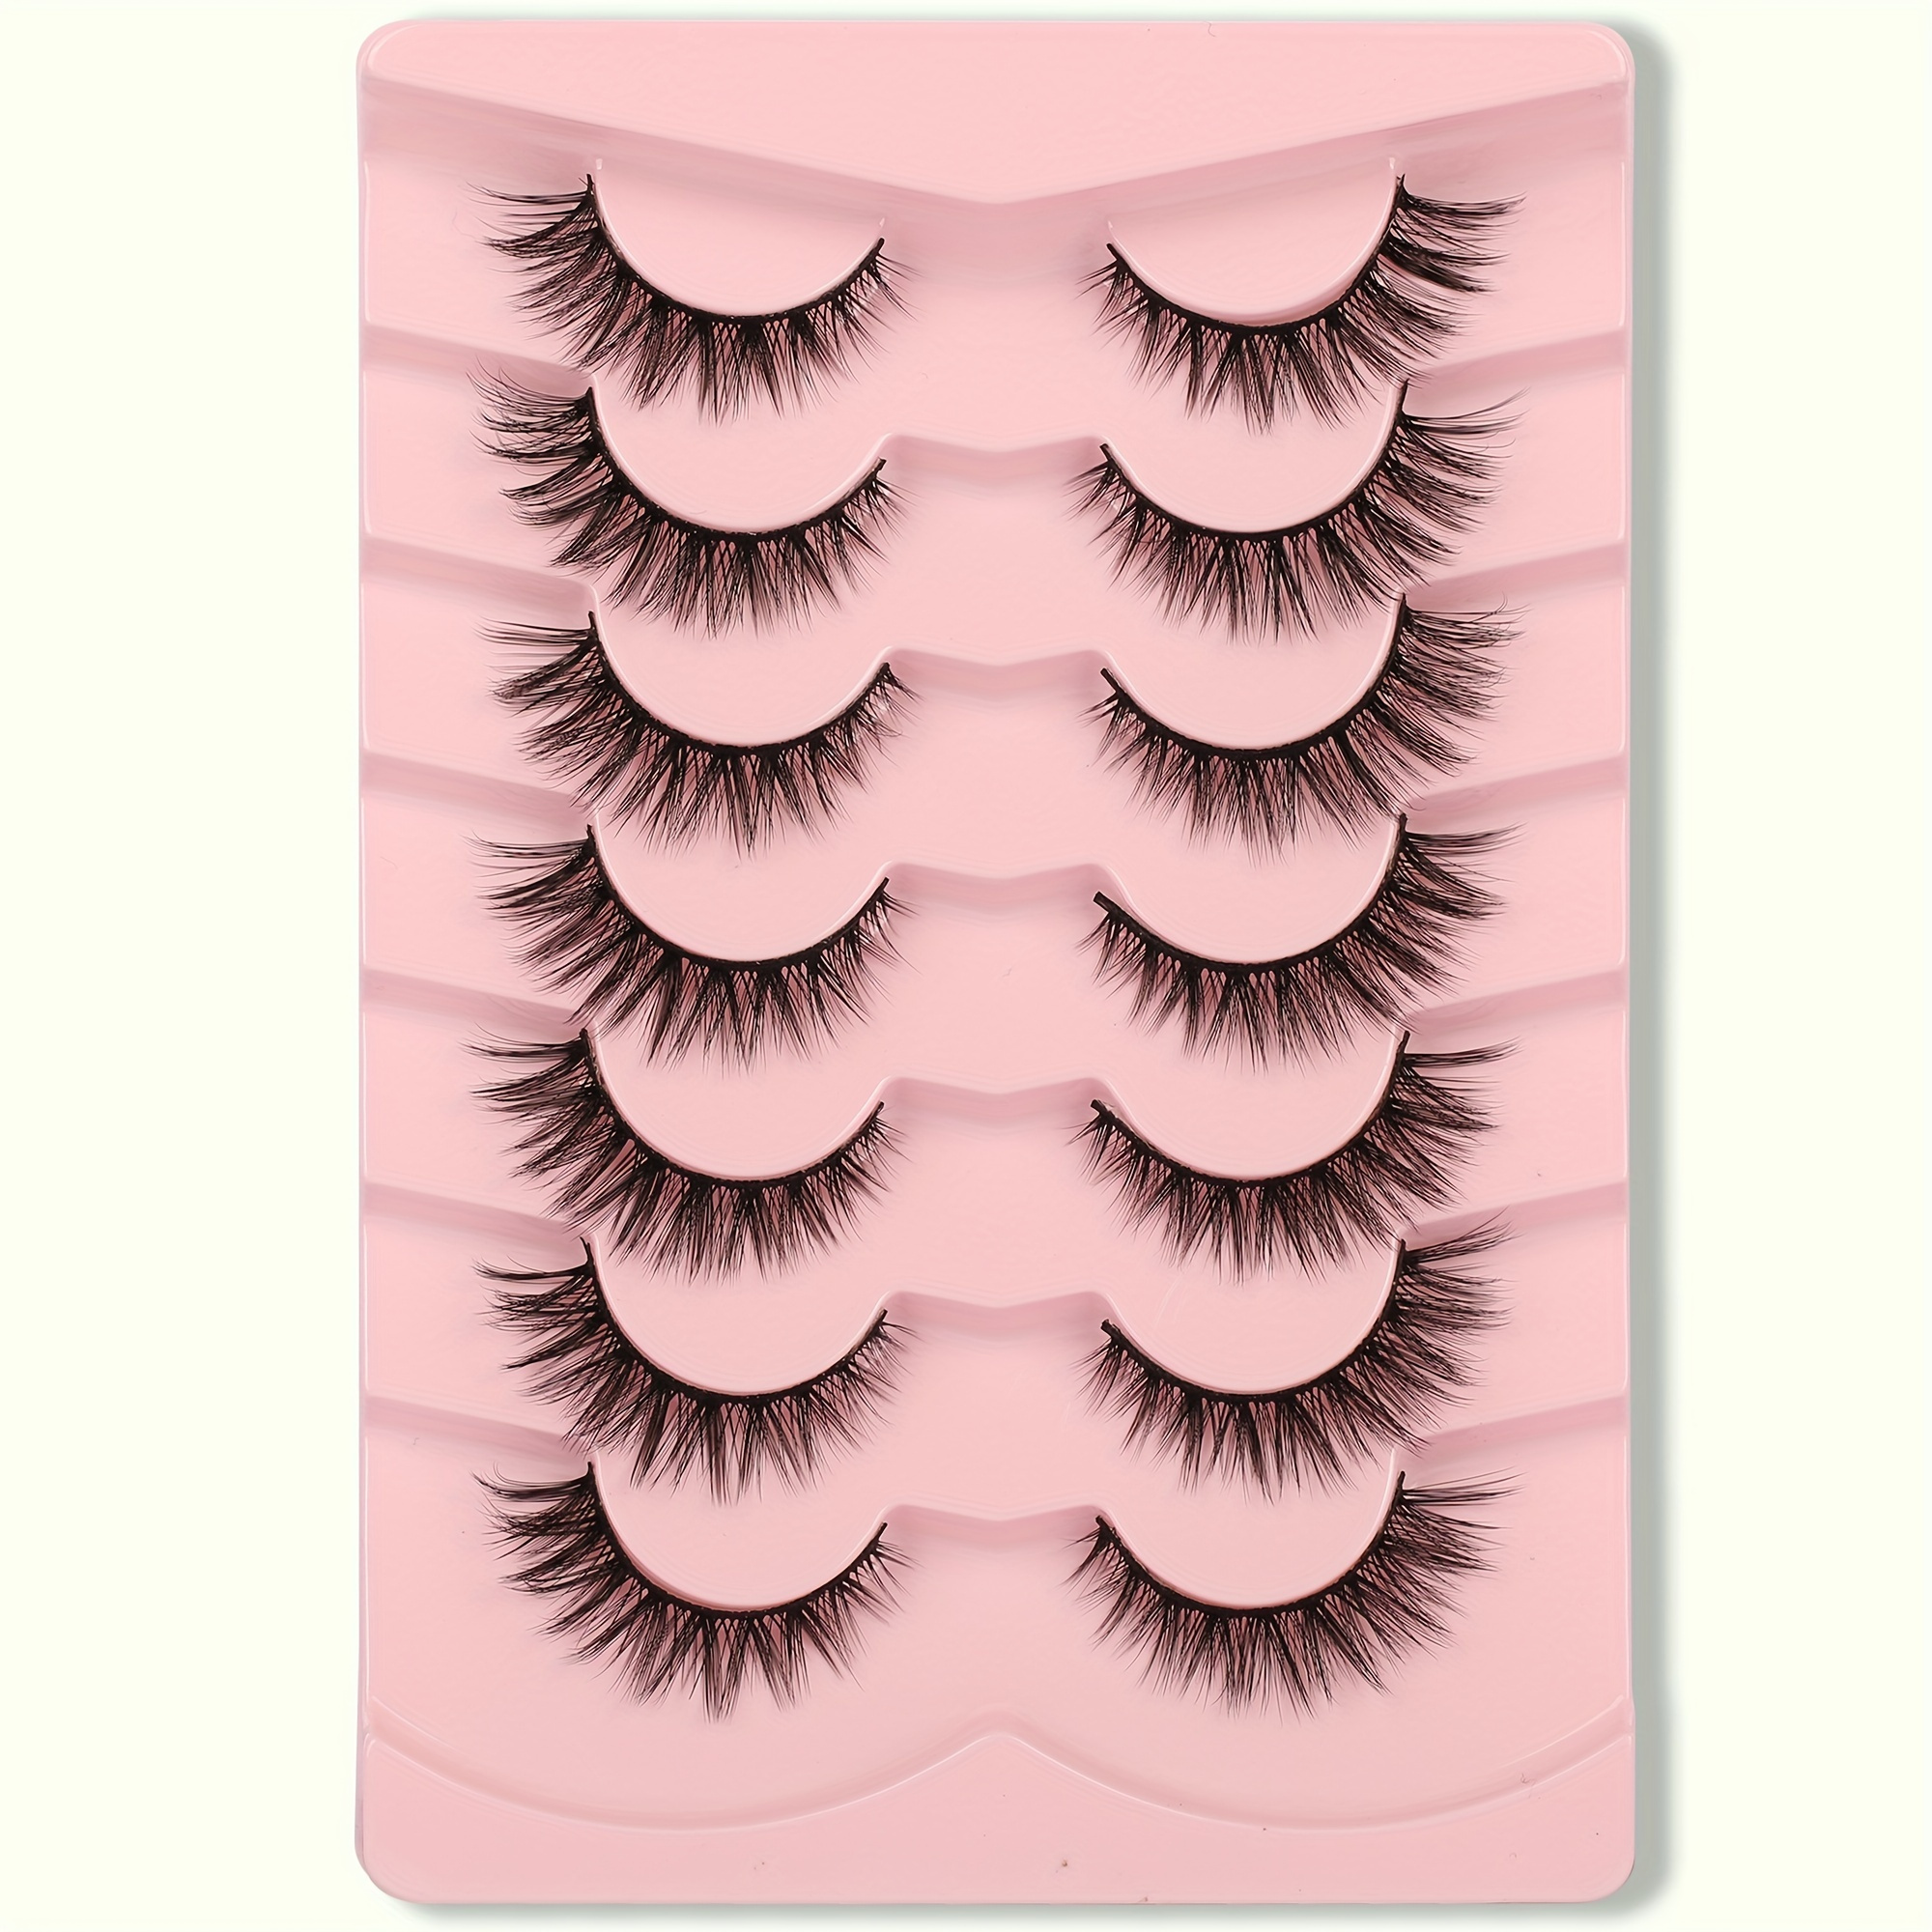 

7 Pairs Natural Look Cat Eye Lashes - Short Fluffy 3d Faux Mink Strip Lashes For Wispy Eyelashes